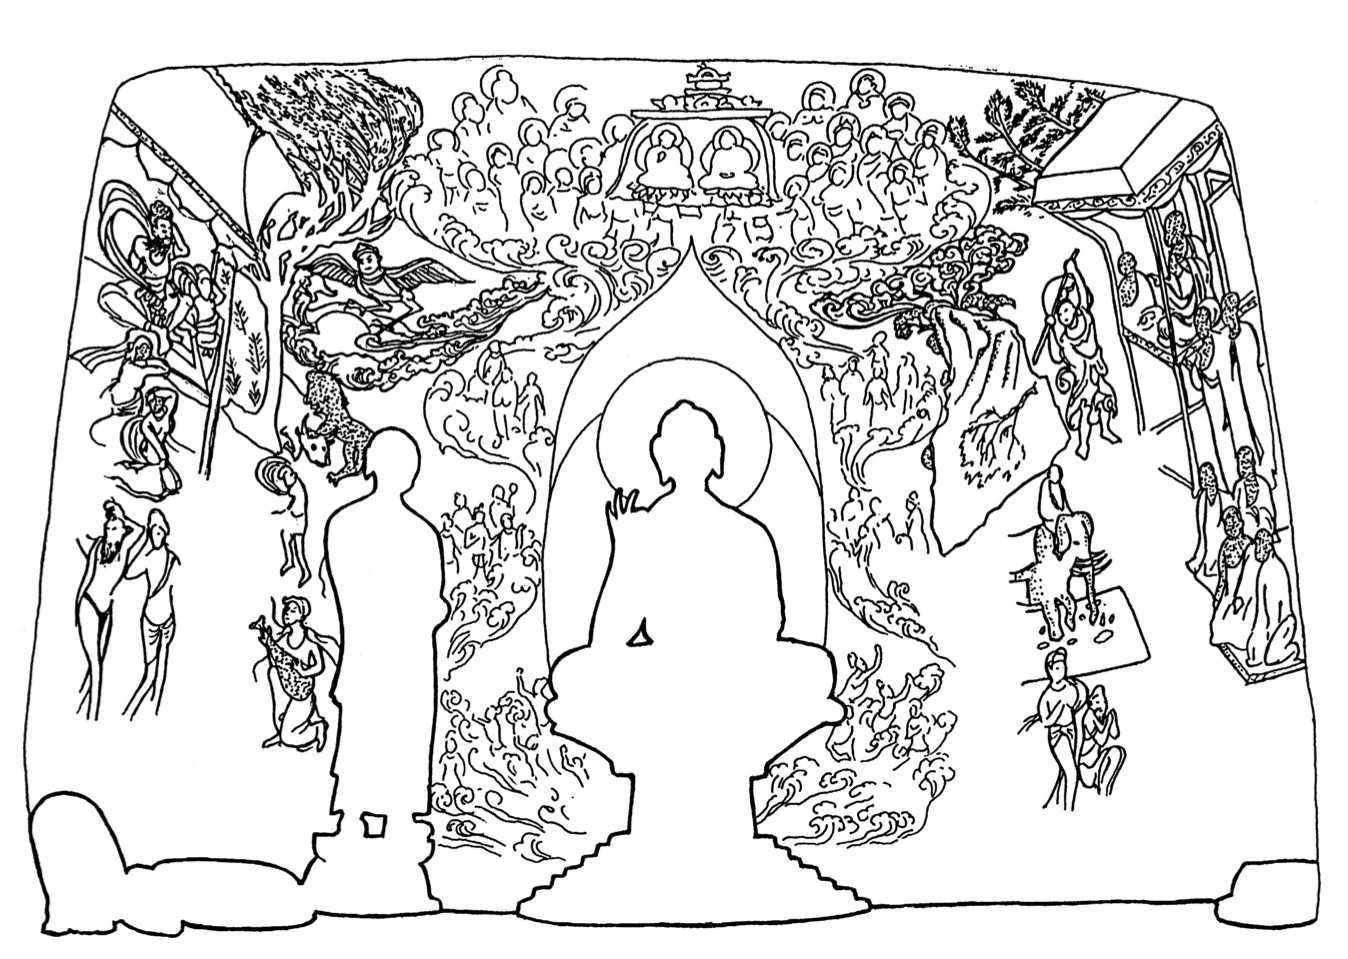 Figure 4: The shrine on the west wall of Cave 335, painted by Wu Hung